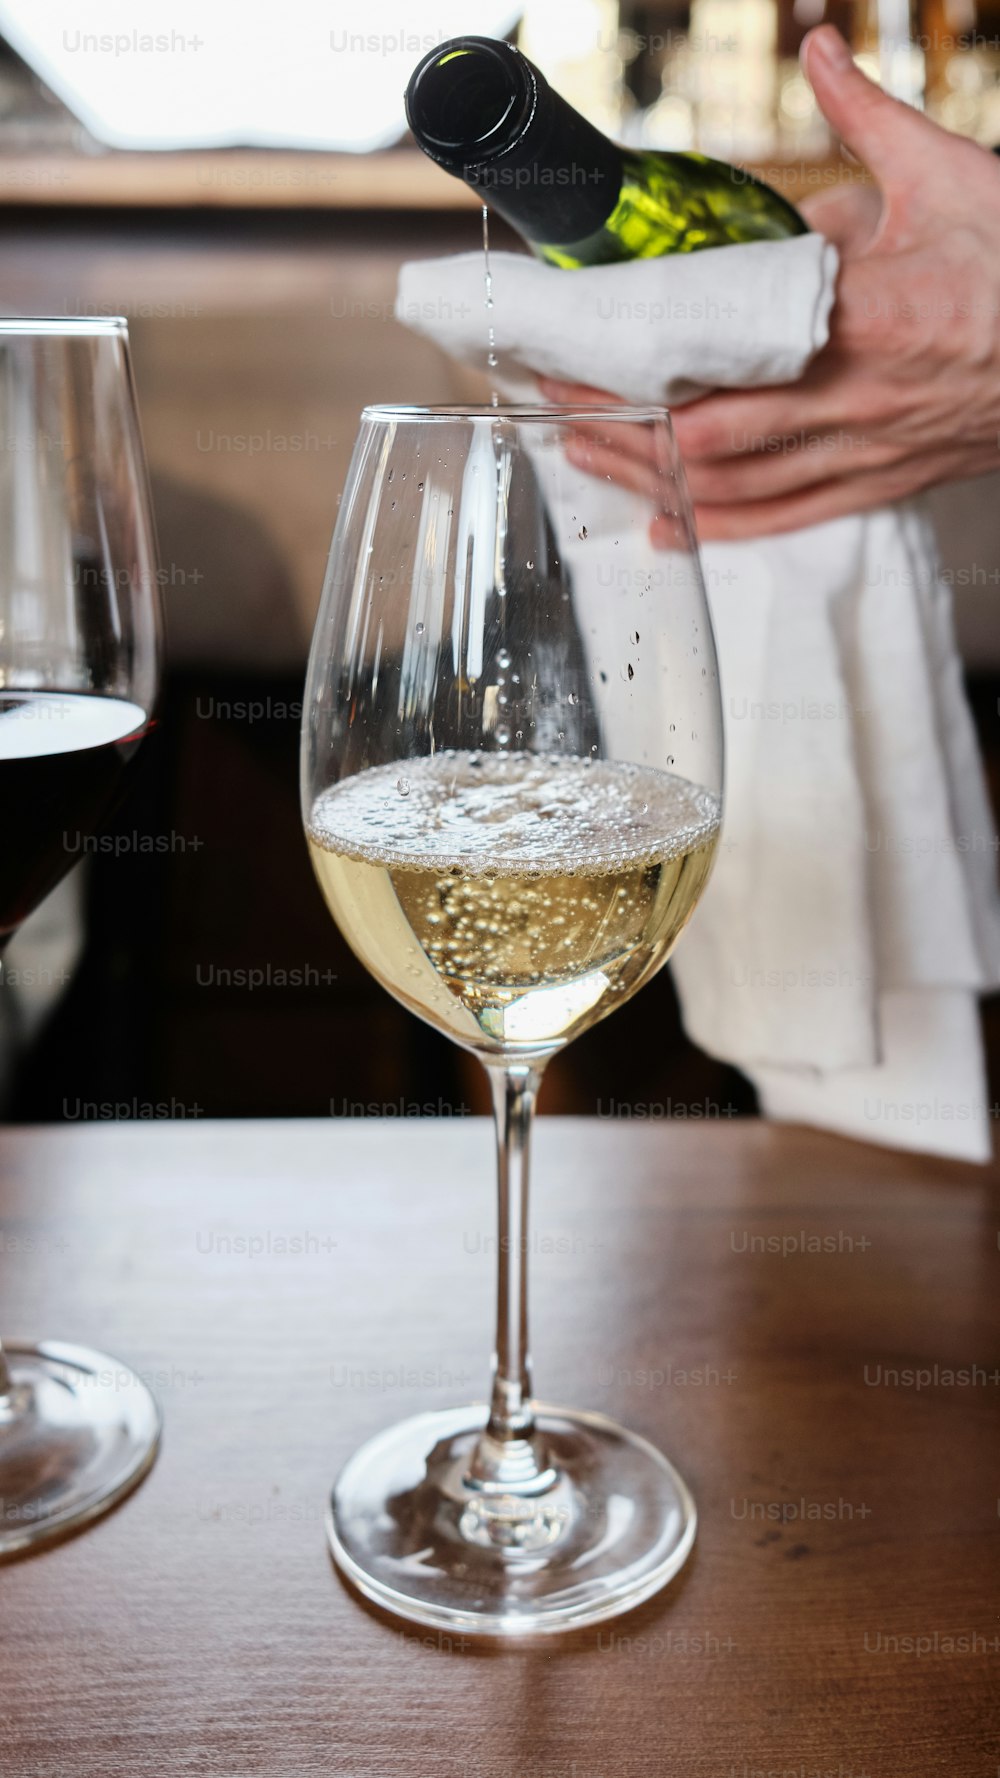 a person pouring a glass of wine into a wine glass